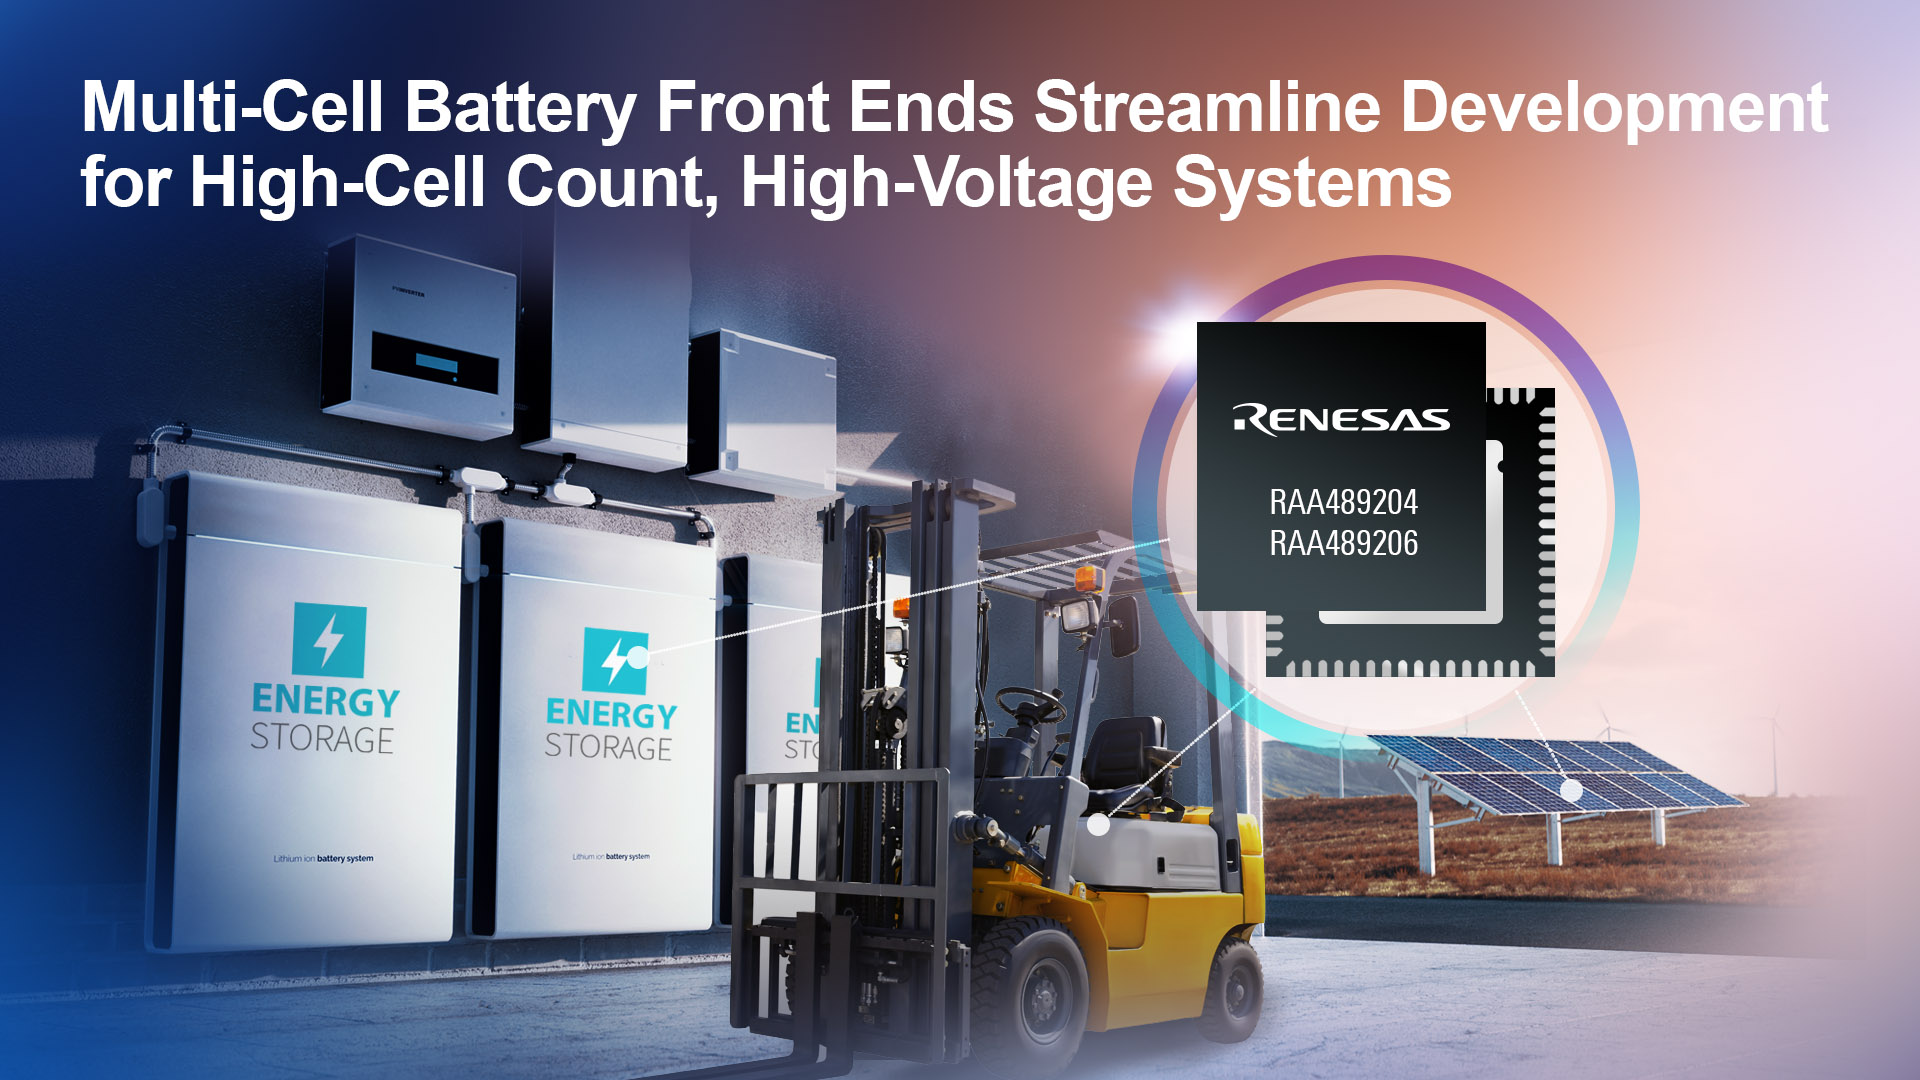 Multi-Cell Battery Front End Family for High-Cell Count Systems